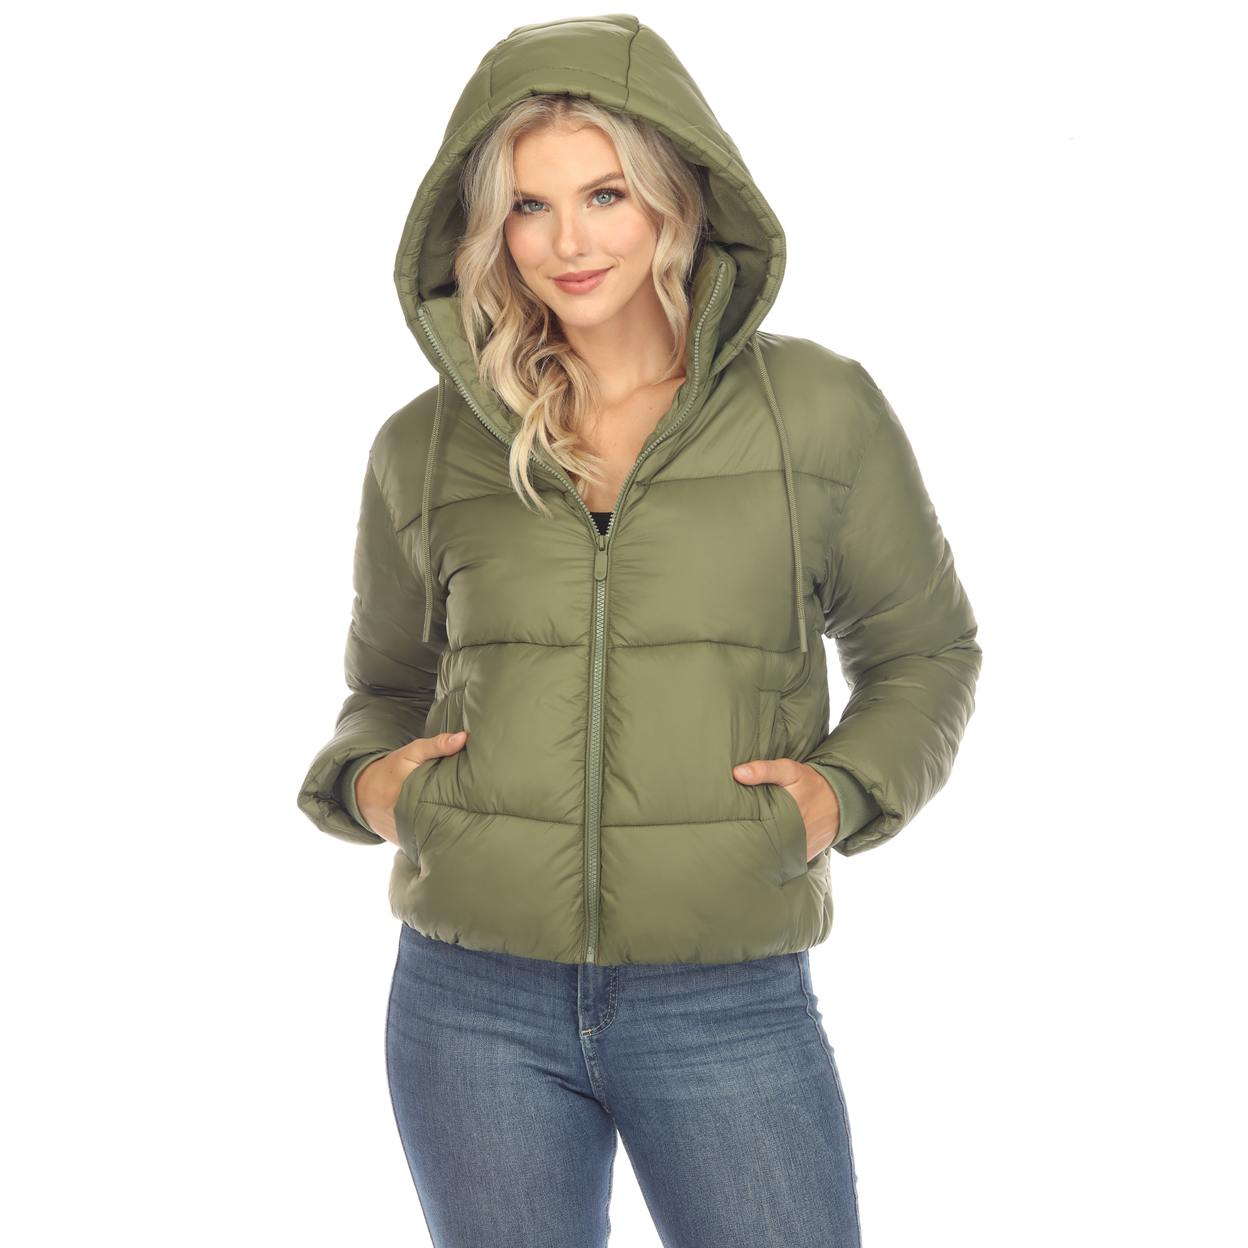 White Mark Women's Zip Hooded Puffer Jacket With Pockets - Blue, X-large